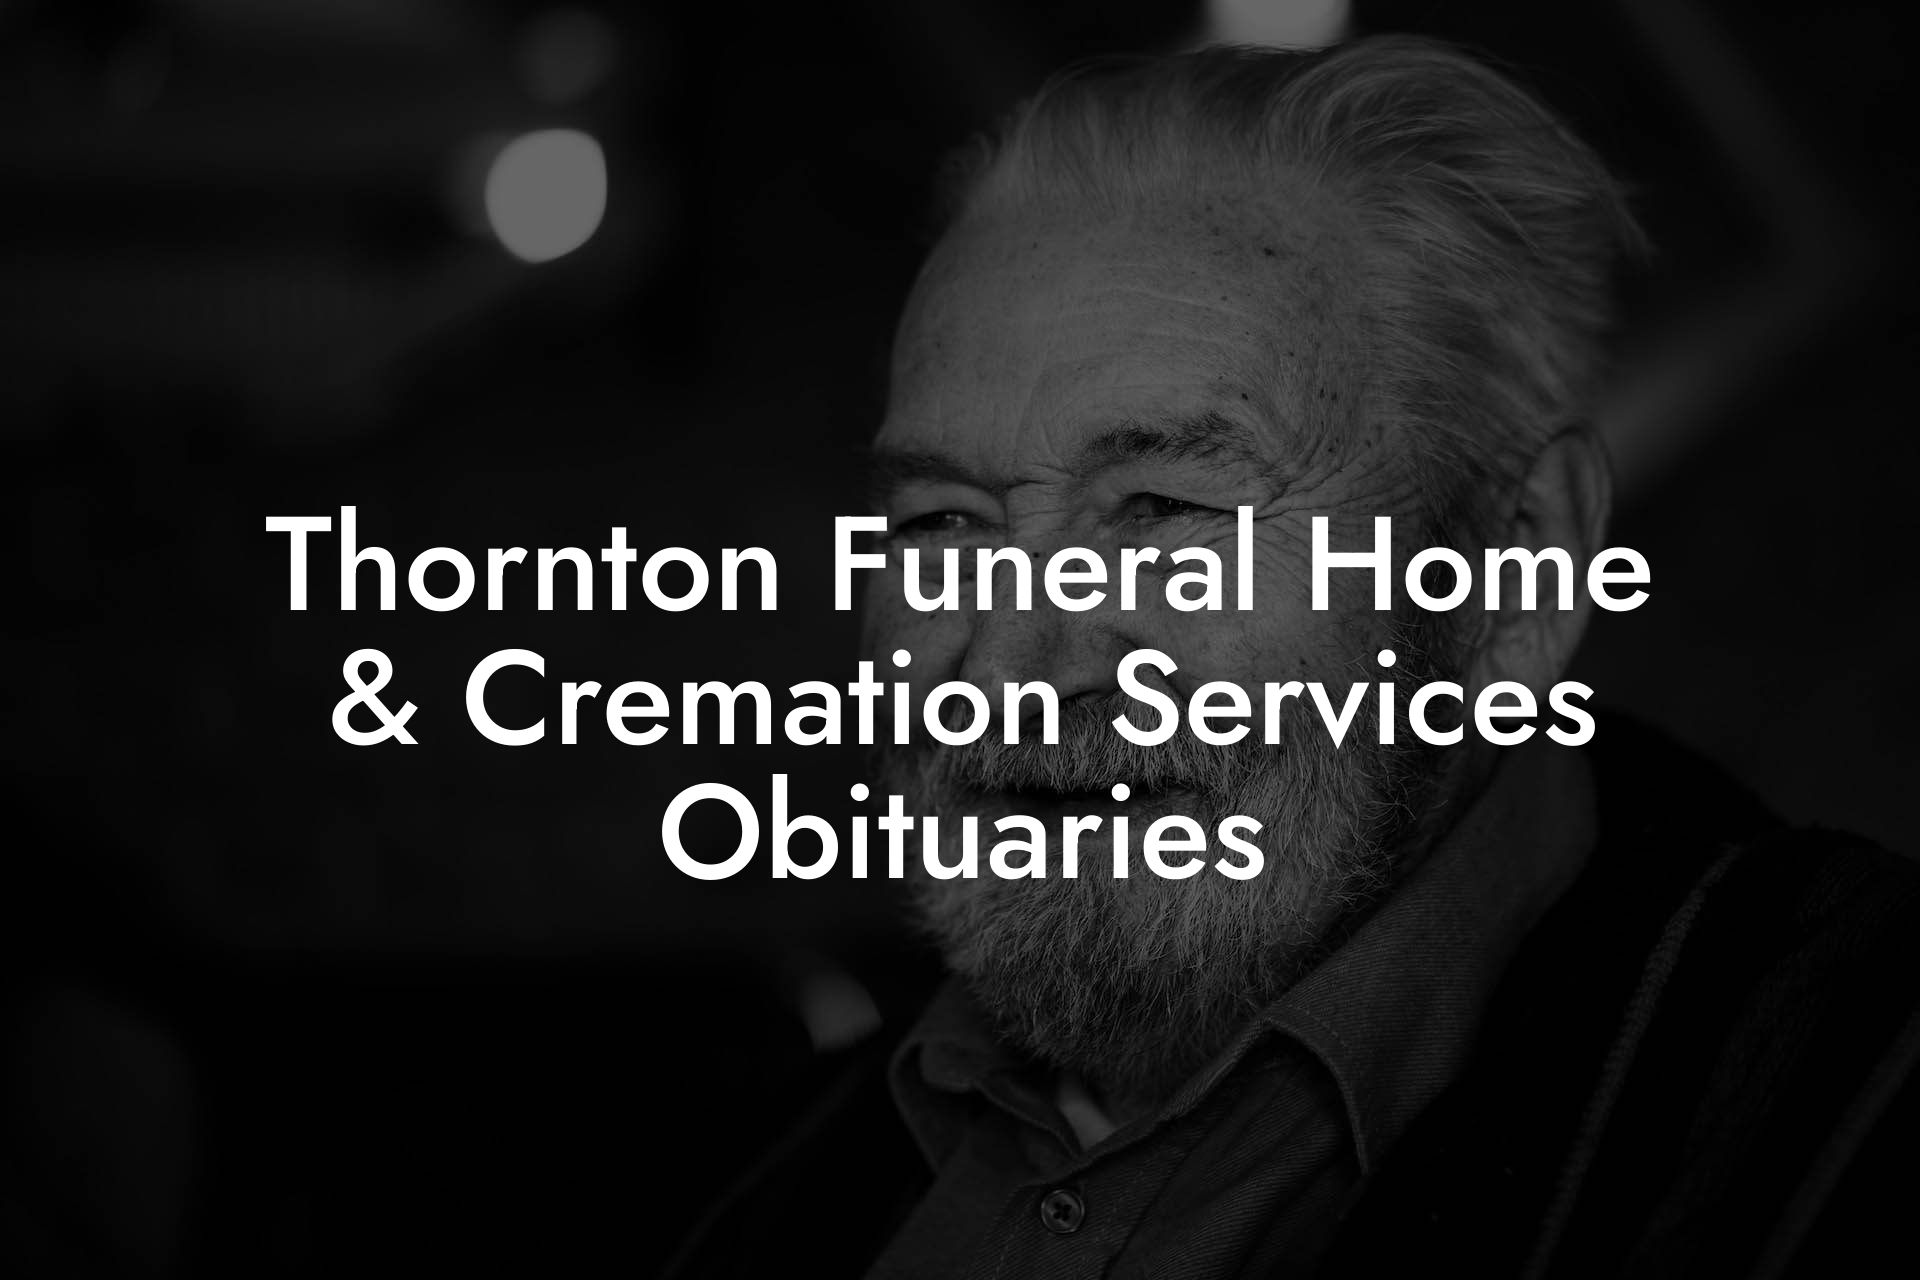 Thornton Funeral Home & Cremation Services Obituaries